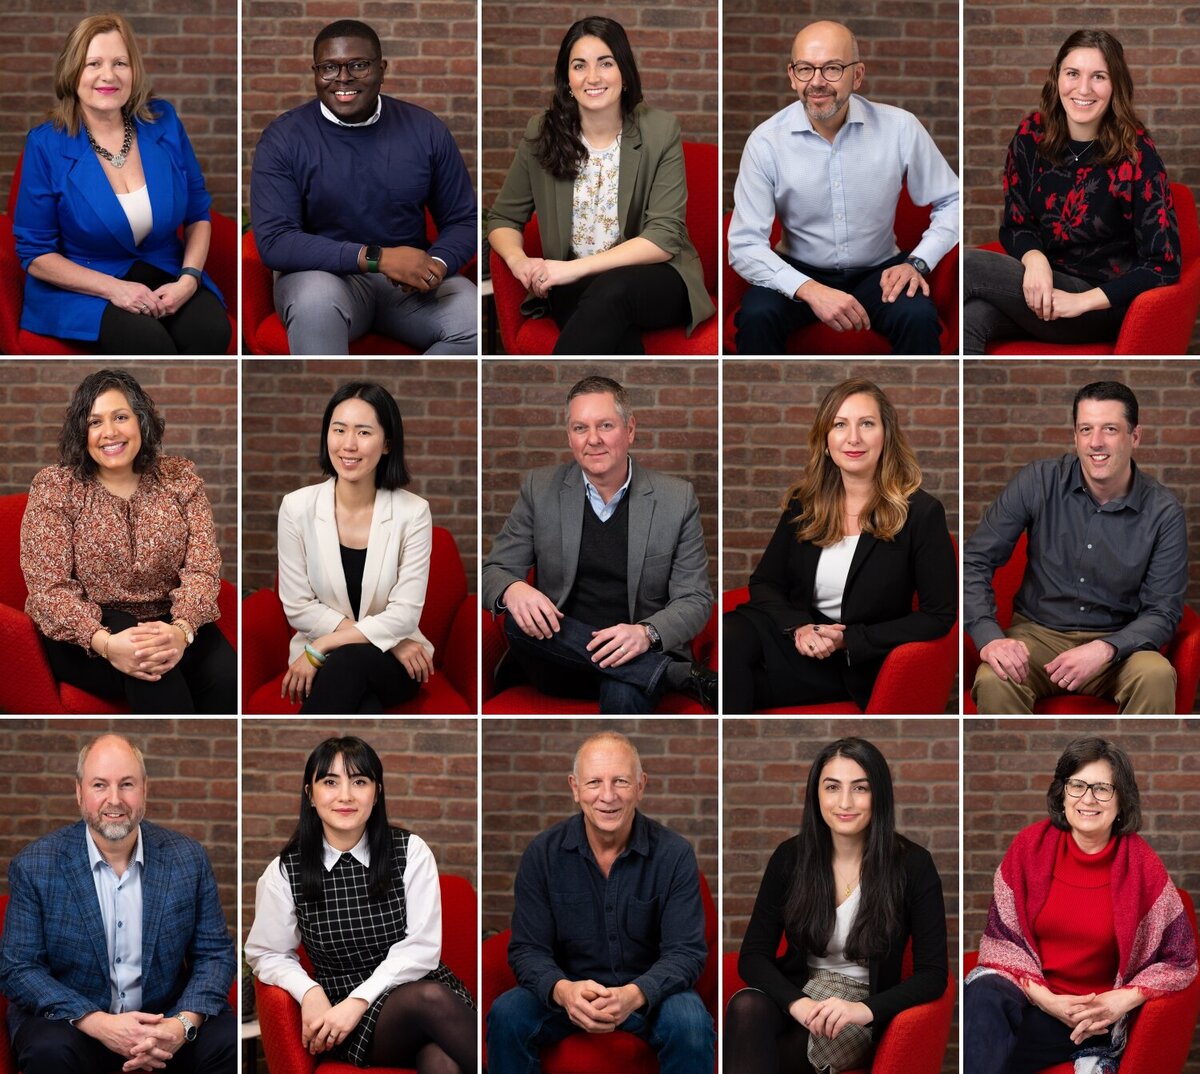 Ottawa corporate photography of subjects sitting in a red chair against a brick wall backdrop.  Captured on location by JEMMAN Photography COMMERCIAL